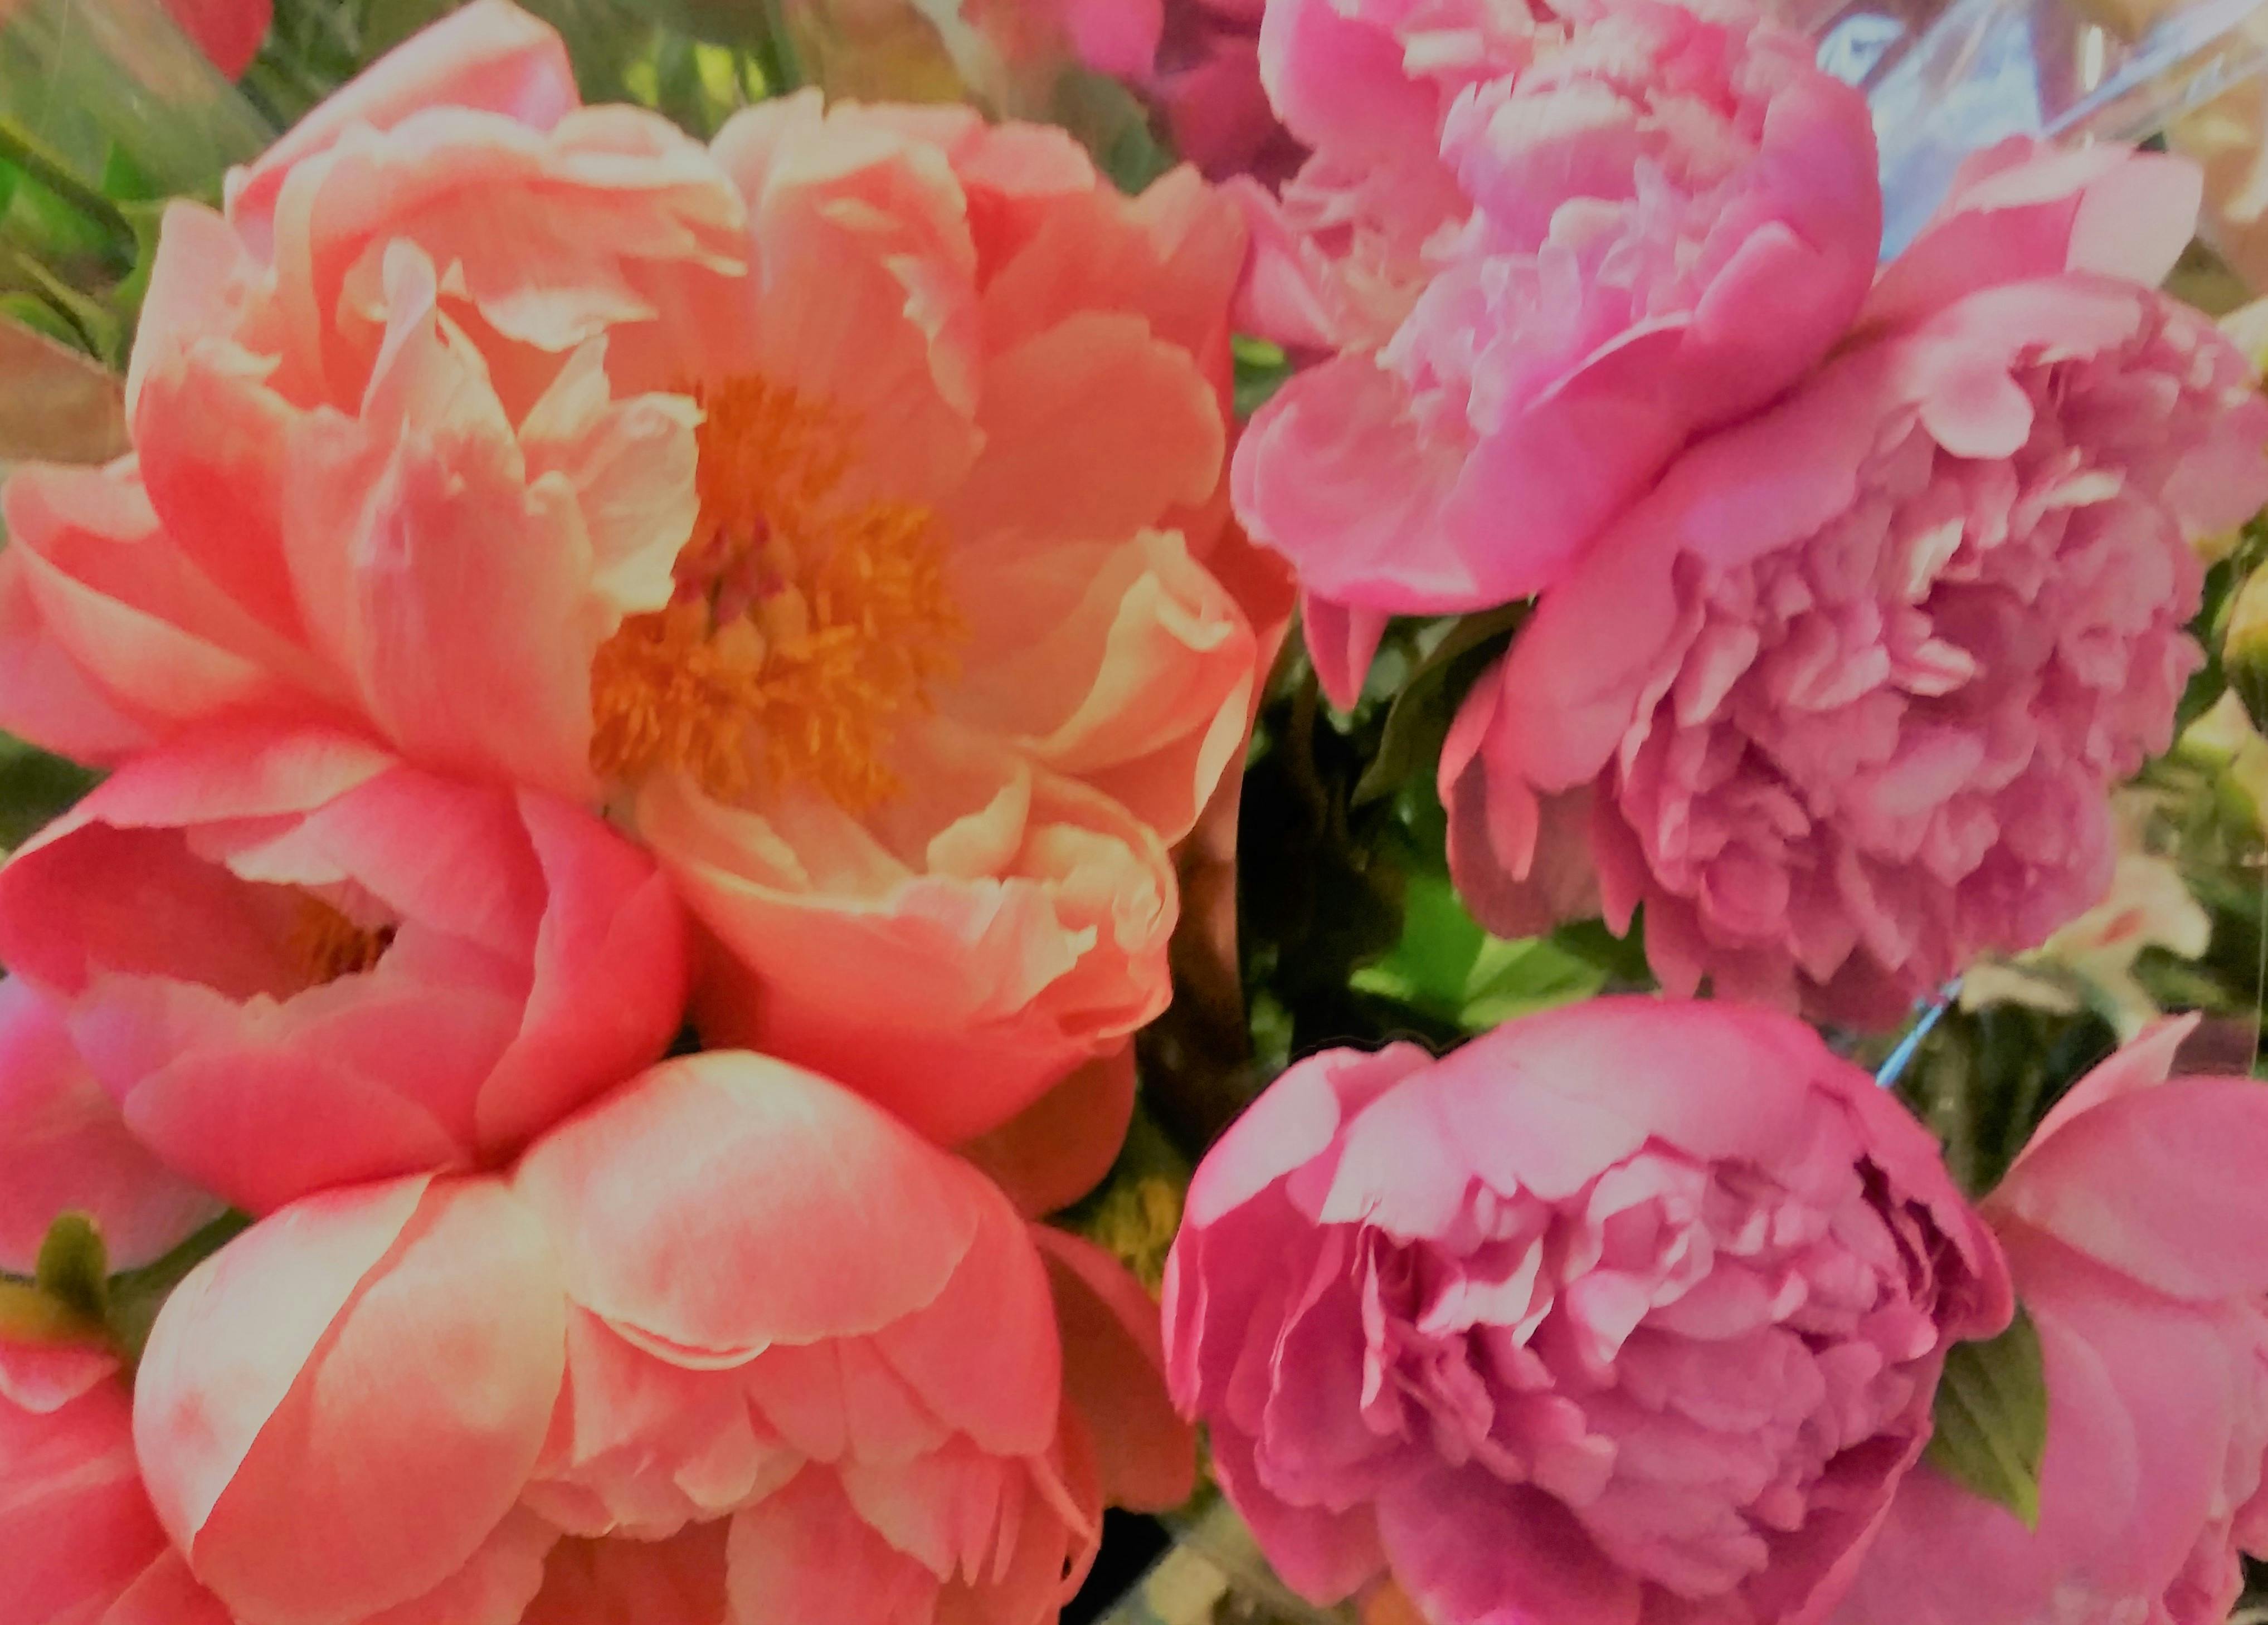 Free stock photo of #peony #spring #bloomed #pink #peach #peonies